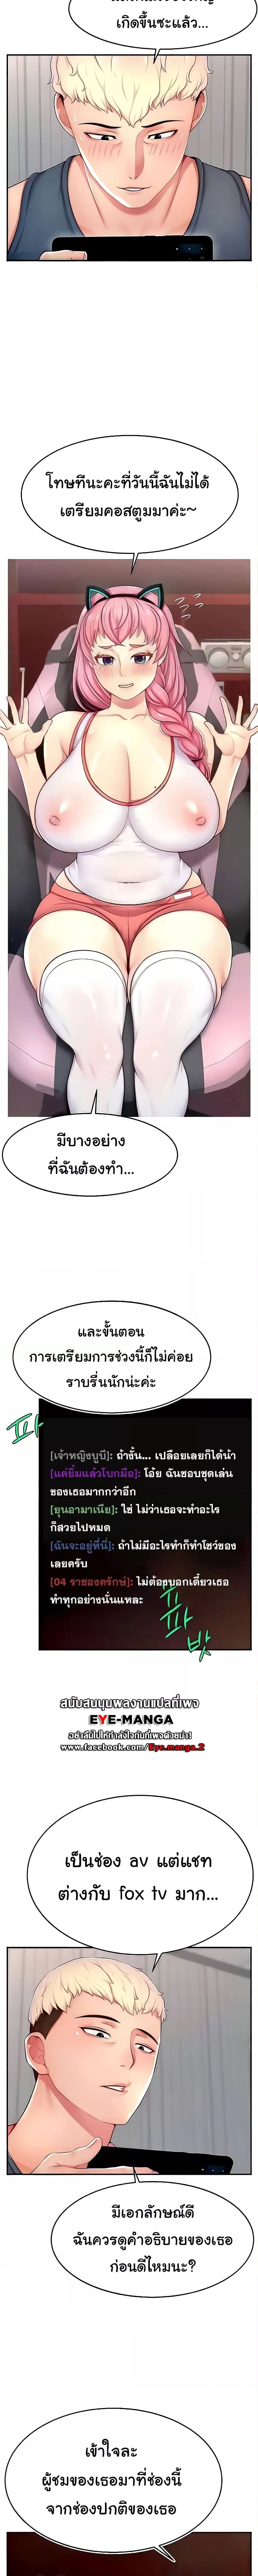 Making Friends With Streamers by Hacking! ตอนที่ 14 ภาพ 4